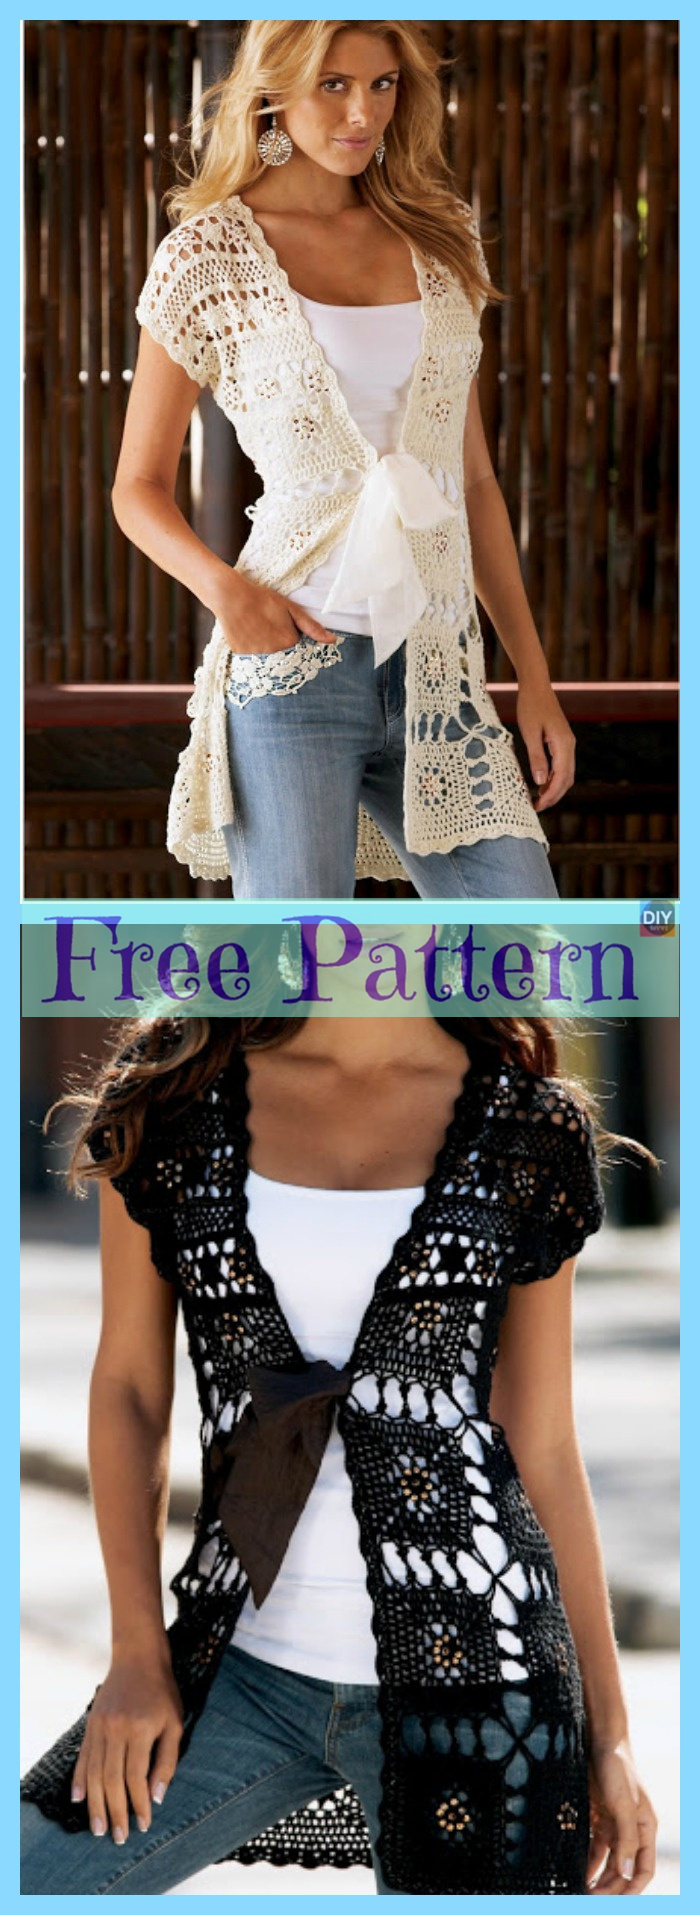 diy4ever-Crochet Lace Summer Tops - Free Patterns 